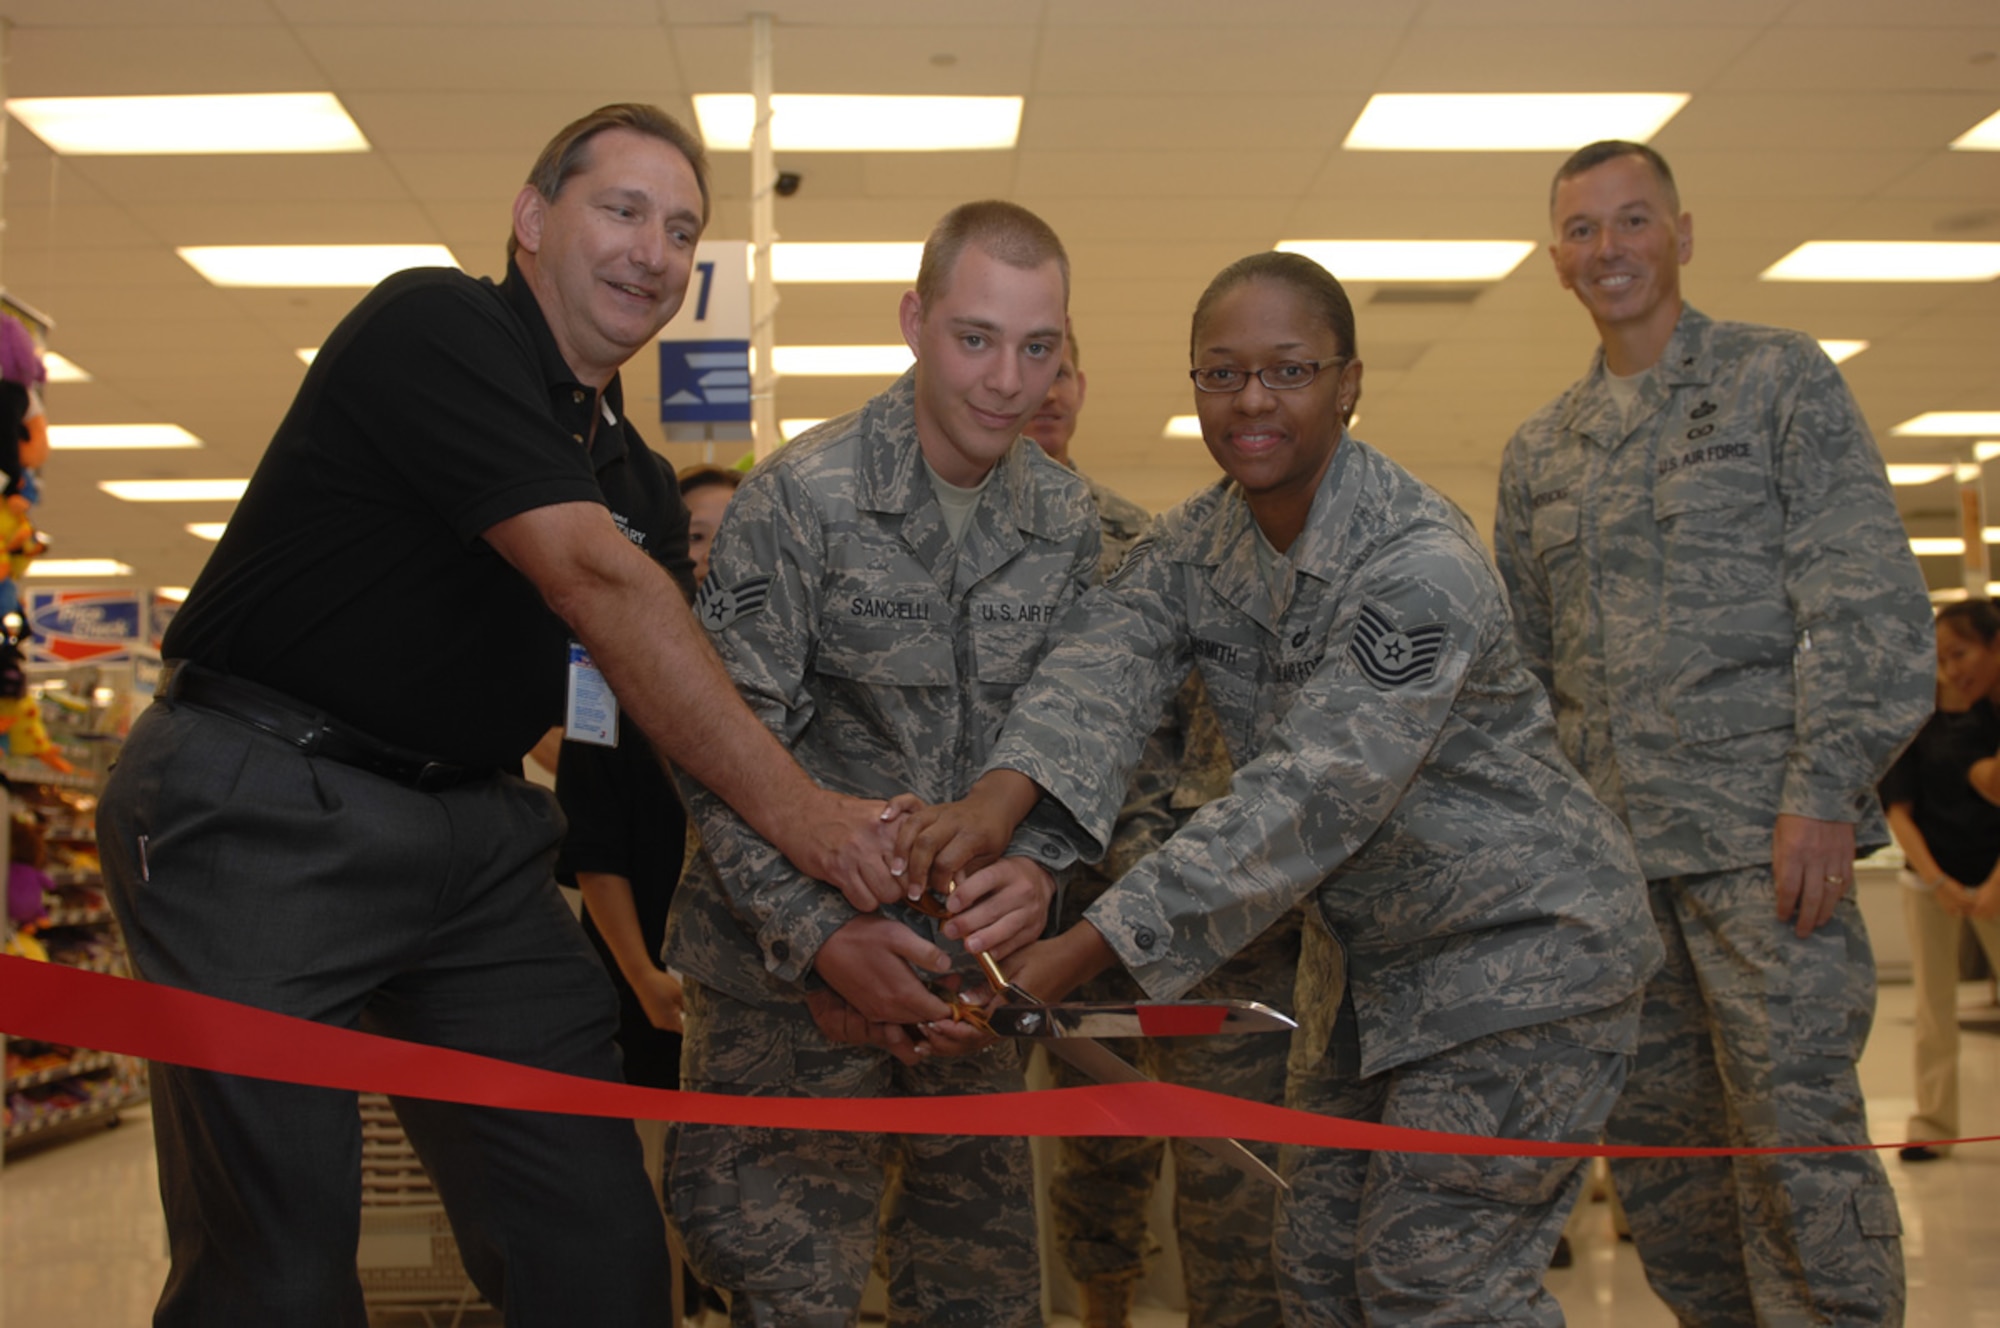 (Left to right) Andy Louder, Ellsworth Base Exchange manager, Senior Airman Anthony Sanchelli, 28th Bomb Wing protocol specialist, and Tech. Sgt. Laquisha Highsmith, Air Force Financial Services Center merged accountability and fund reporting section chief, cut the ribbon at the revamped BX here as Brig. Gen. Francis Hendricks, Army and Air Force Exchange Services deputy commander, watches, Aug. 28. This event marked the BX's grand reopening after installing all-new floors and relocating store departments such as military clothing. (U.S. Air Force photo/Airman 1st Class Joshua J. Seybert)